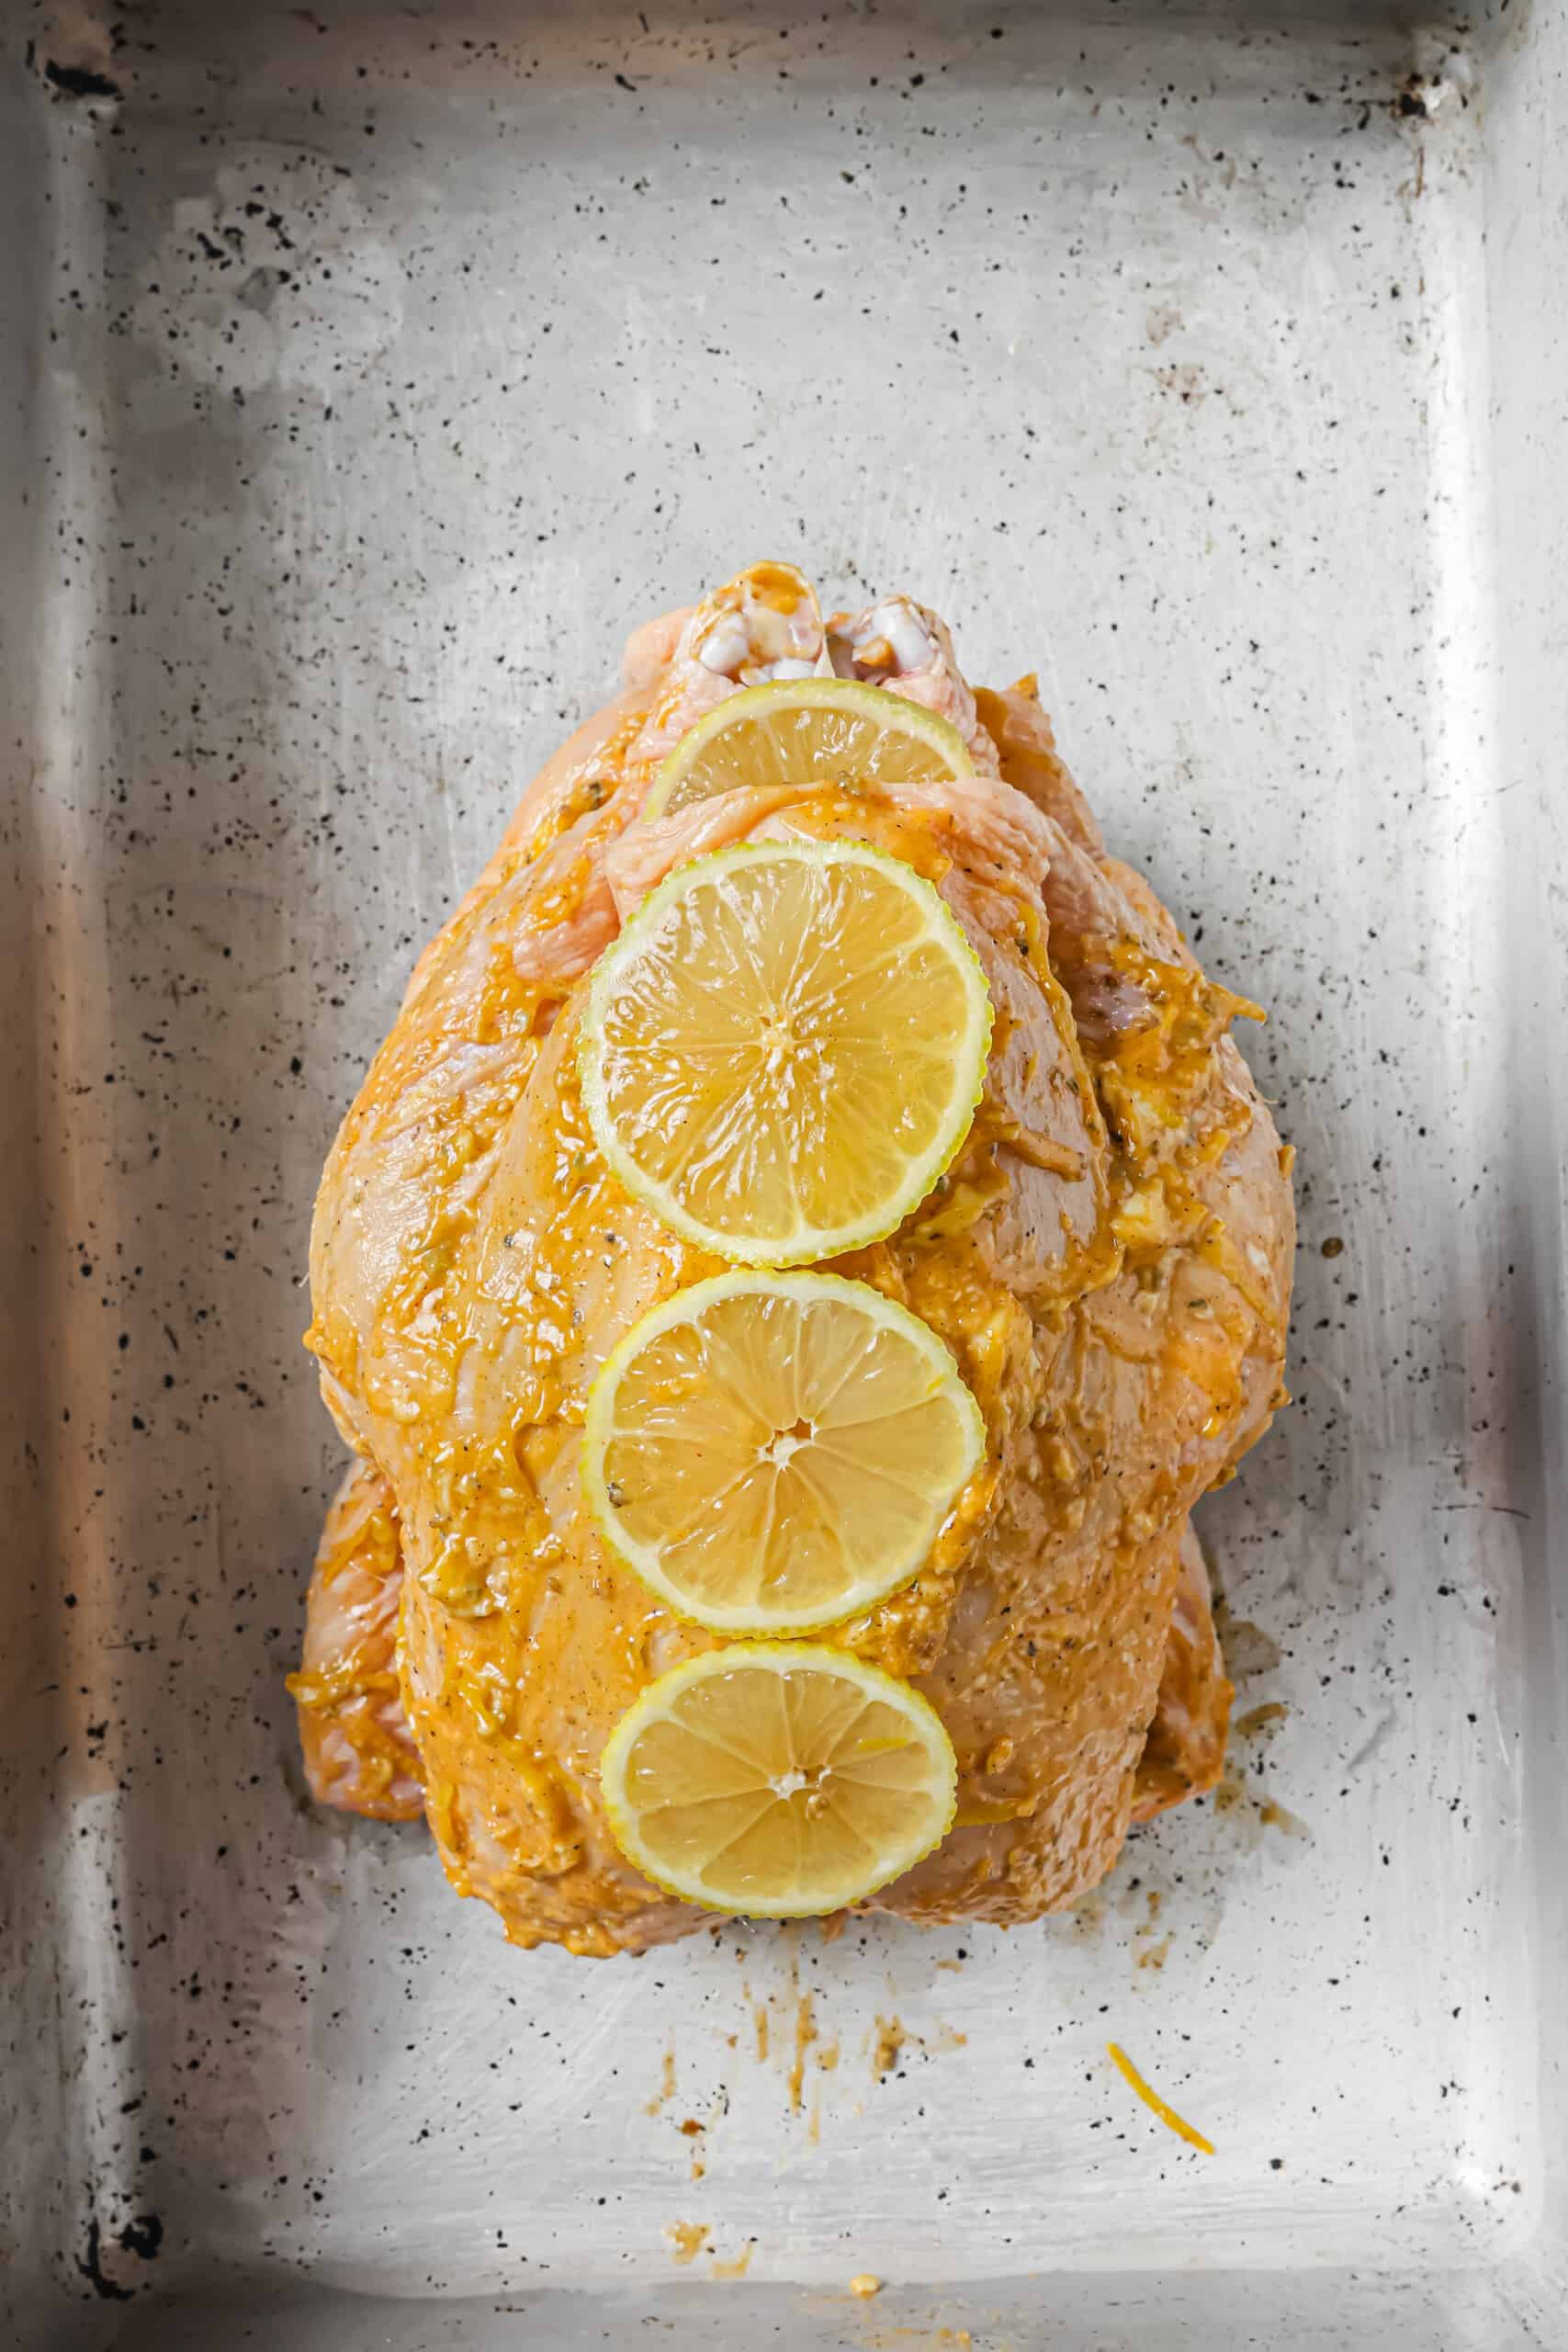 Placing lemon slices on the chicken rubbed with flavored ،er. 